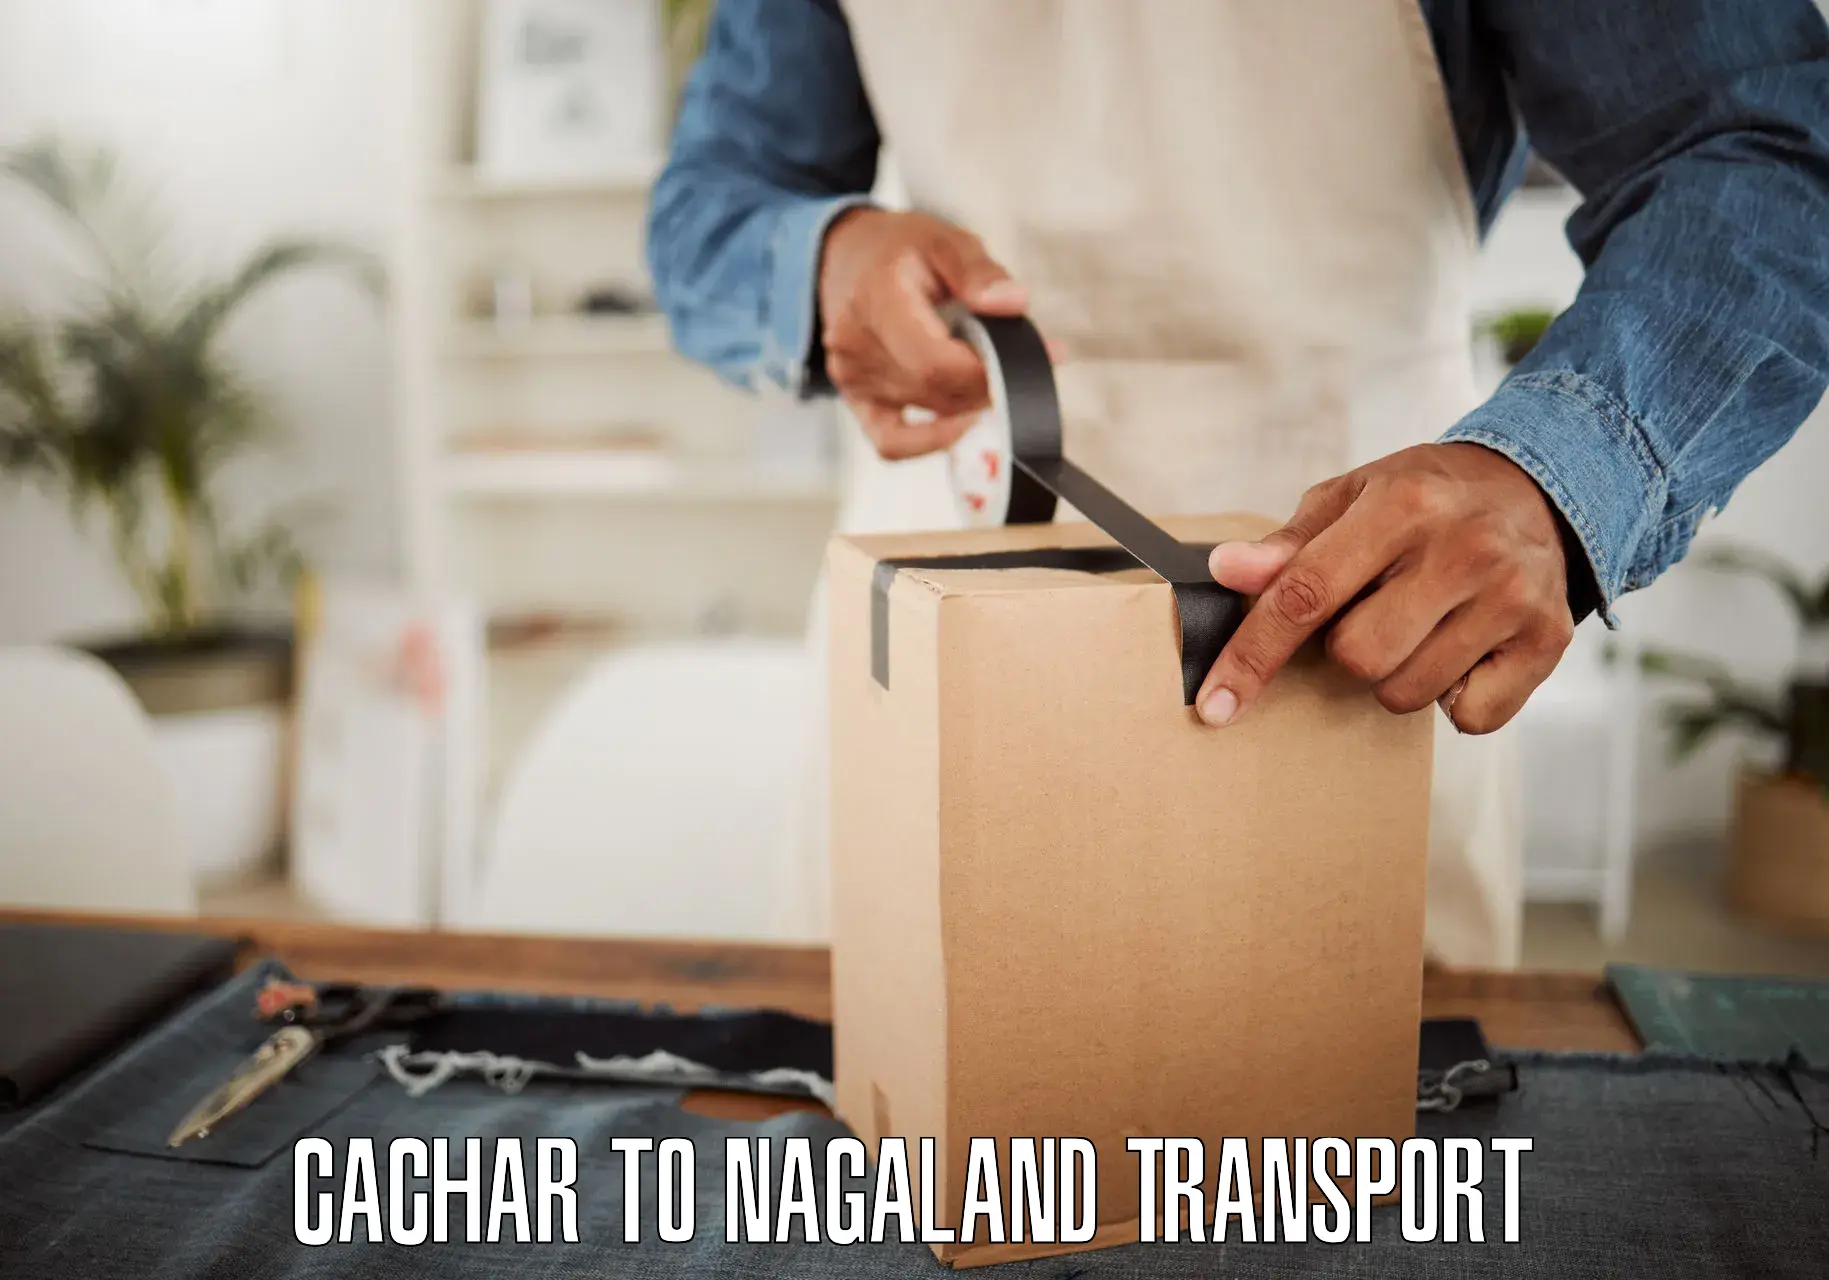 Air freight transport services Cachar to Nagaland